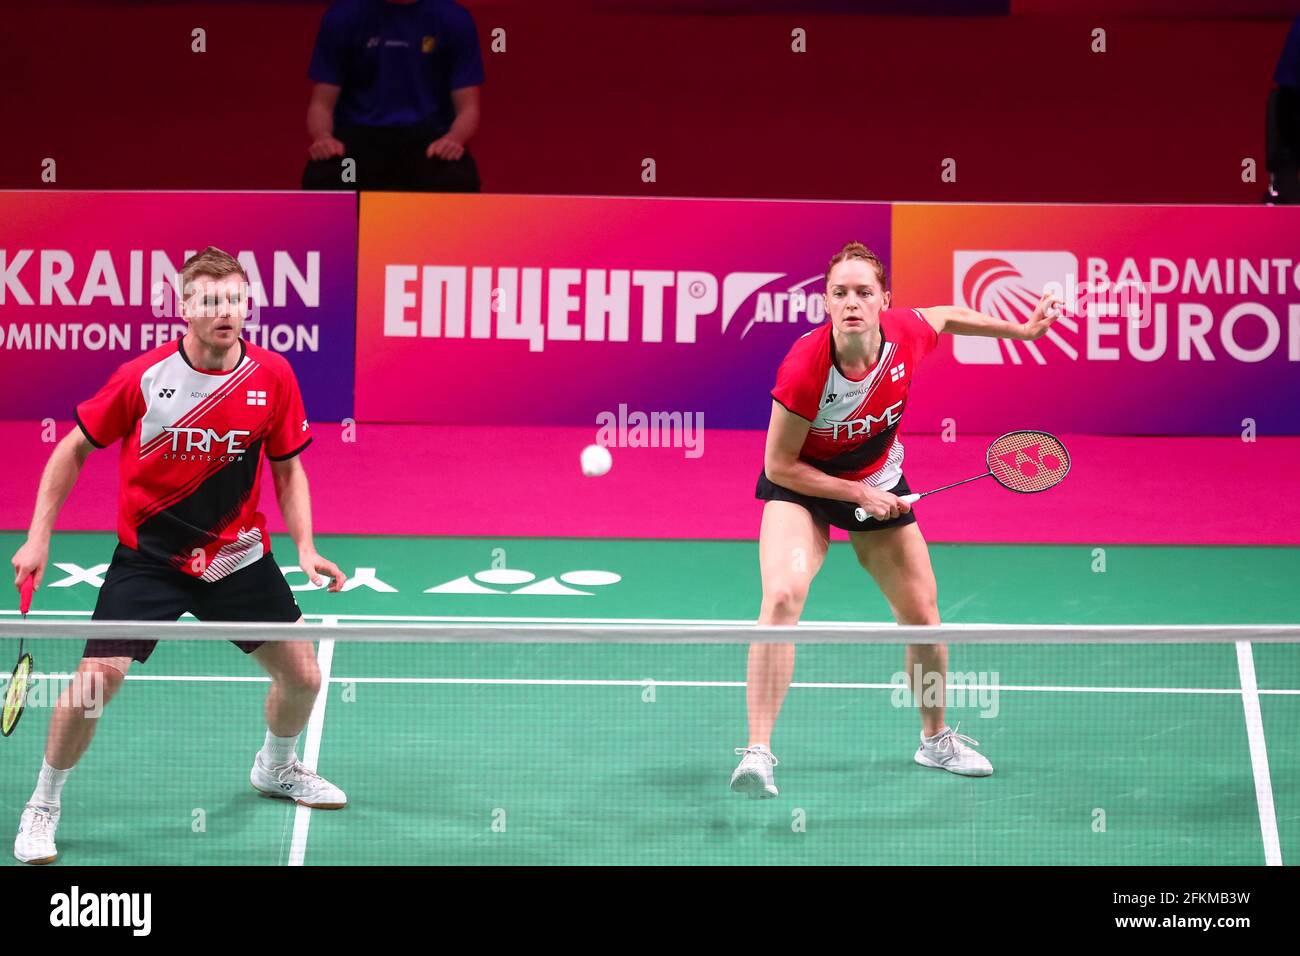 KYIV, UKRAINE - MAY 2: Marcus Ellis of England and Lauren Smith of England compete in their Mixed Doubles Final match against Rodion Alimov of Russia Stock Photo